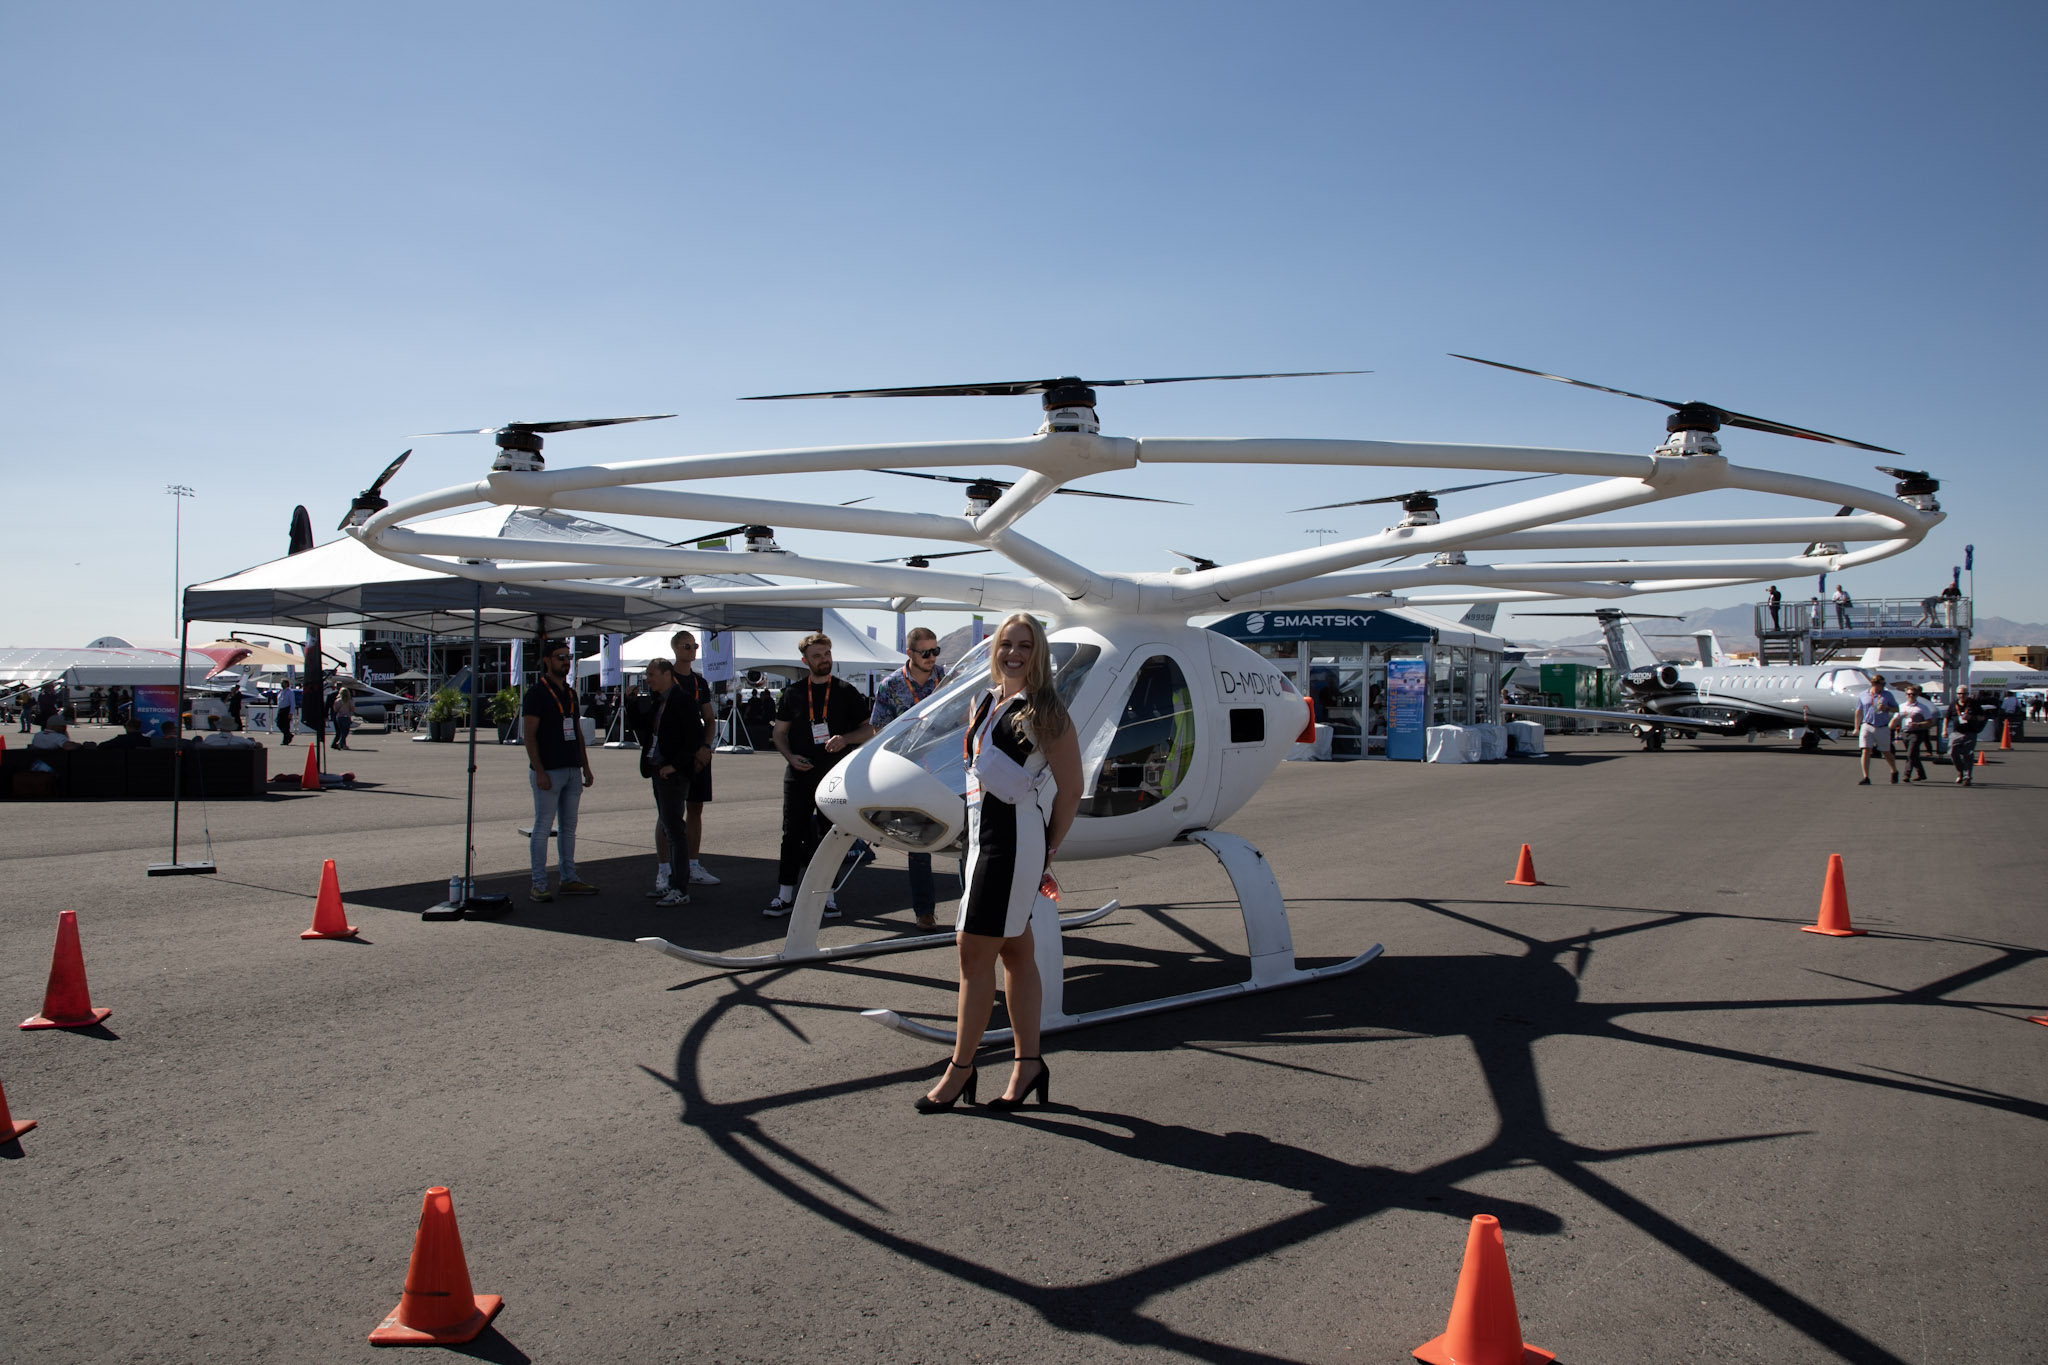 Anna pictured in front of an autonomous aircraft.